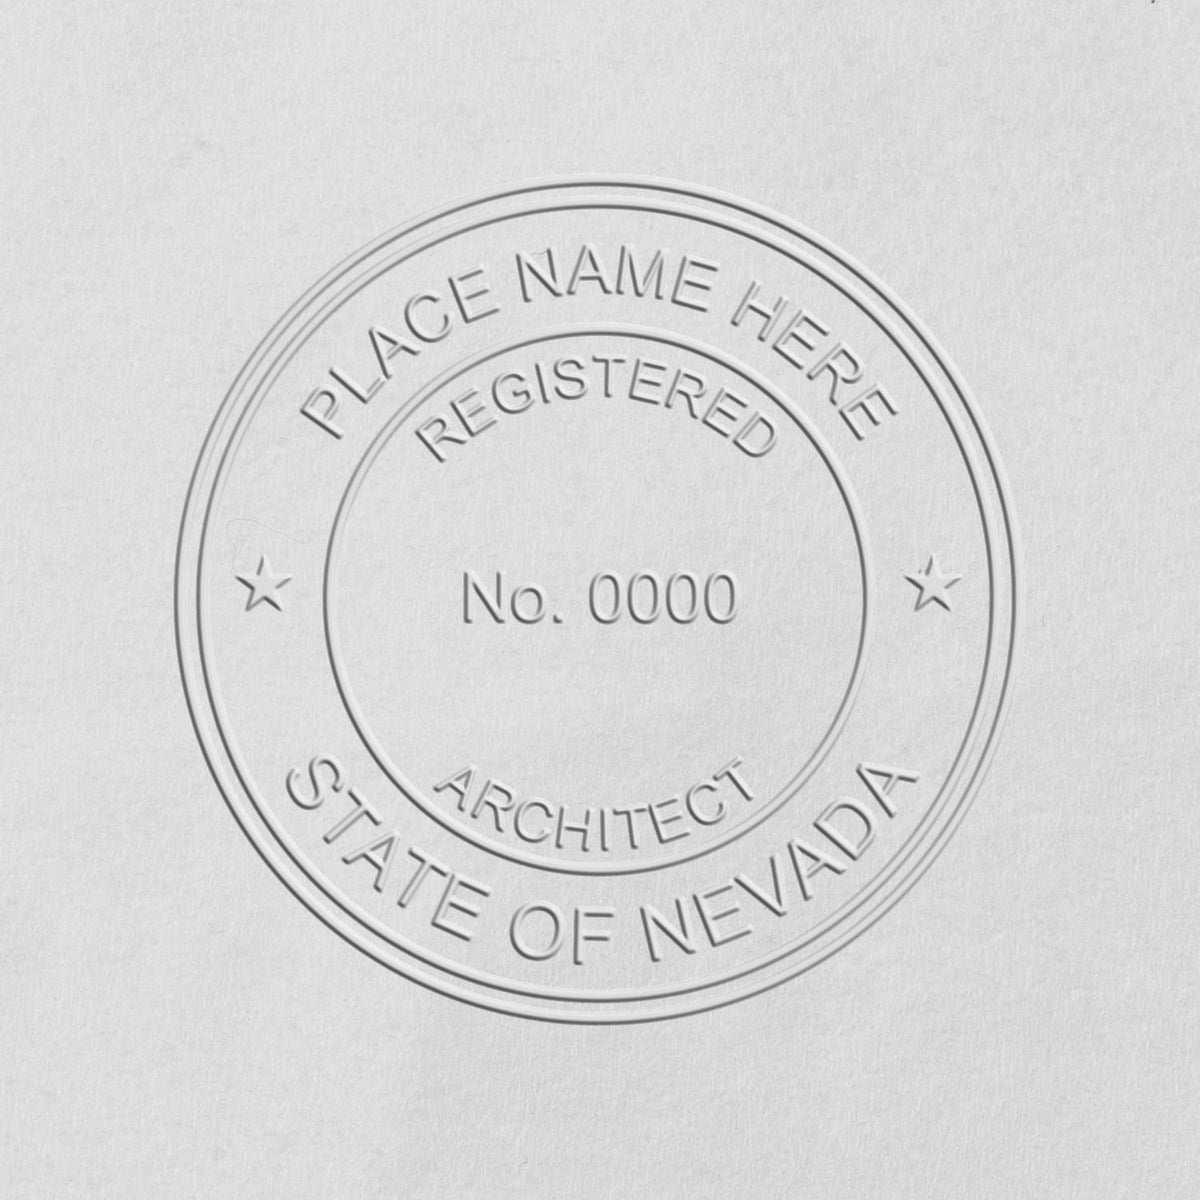 The State of Nevada Long Reach Architectural Embossing Seal stamp impression comes to life with a crisp, detailed photo on paper - showcasing true professional quality.